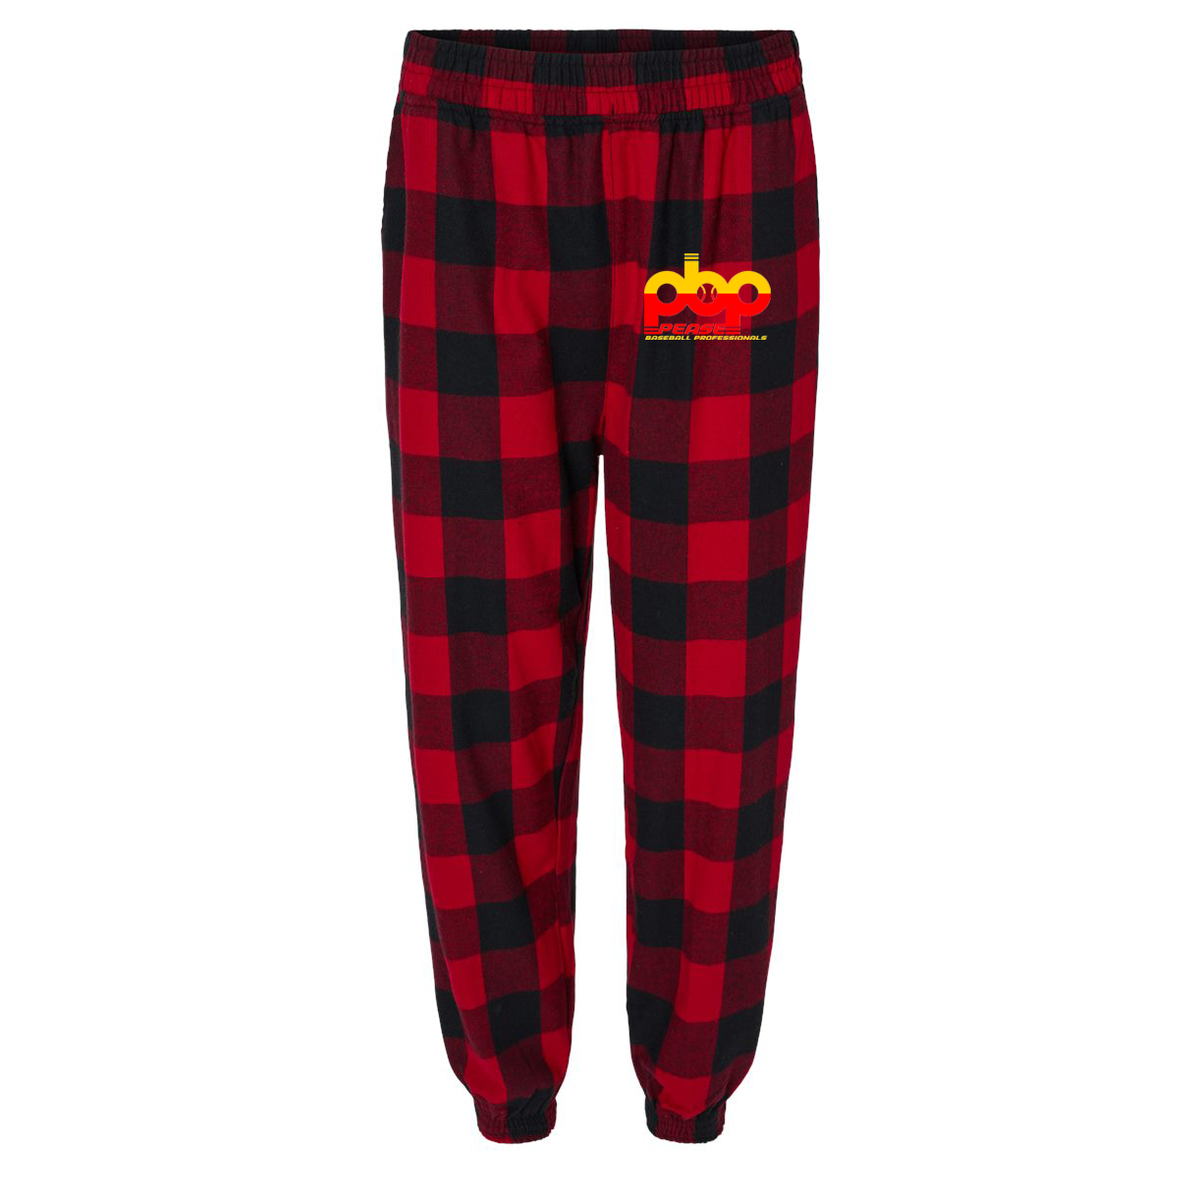 Pease Baseball Professionals Flannel Jogger